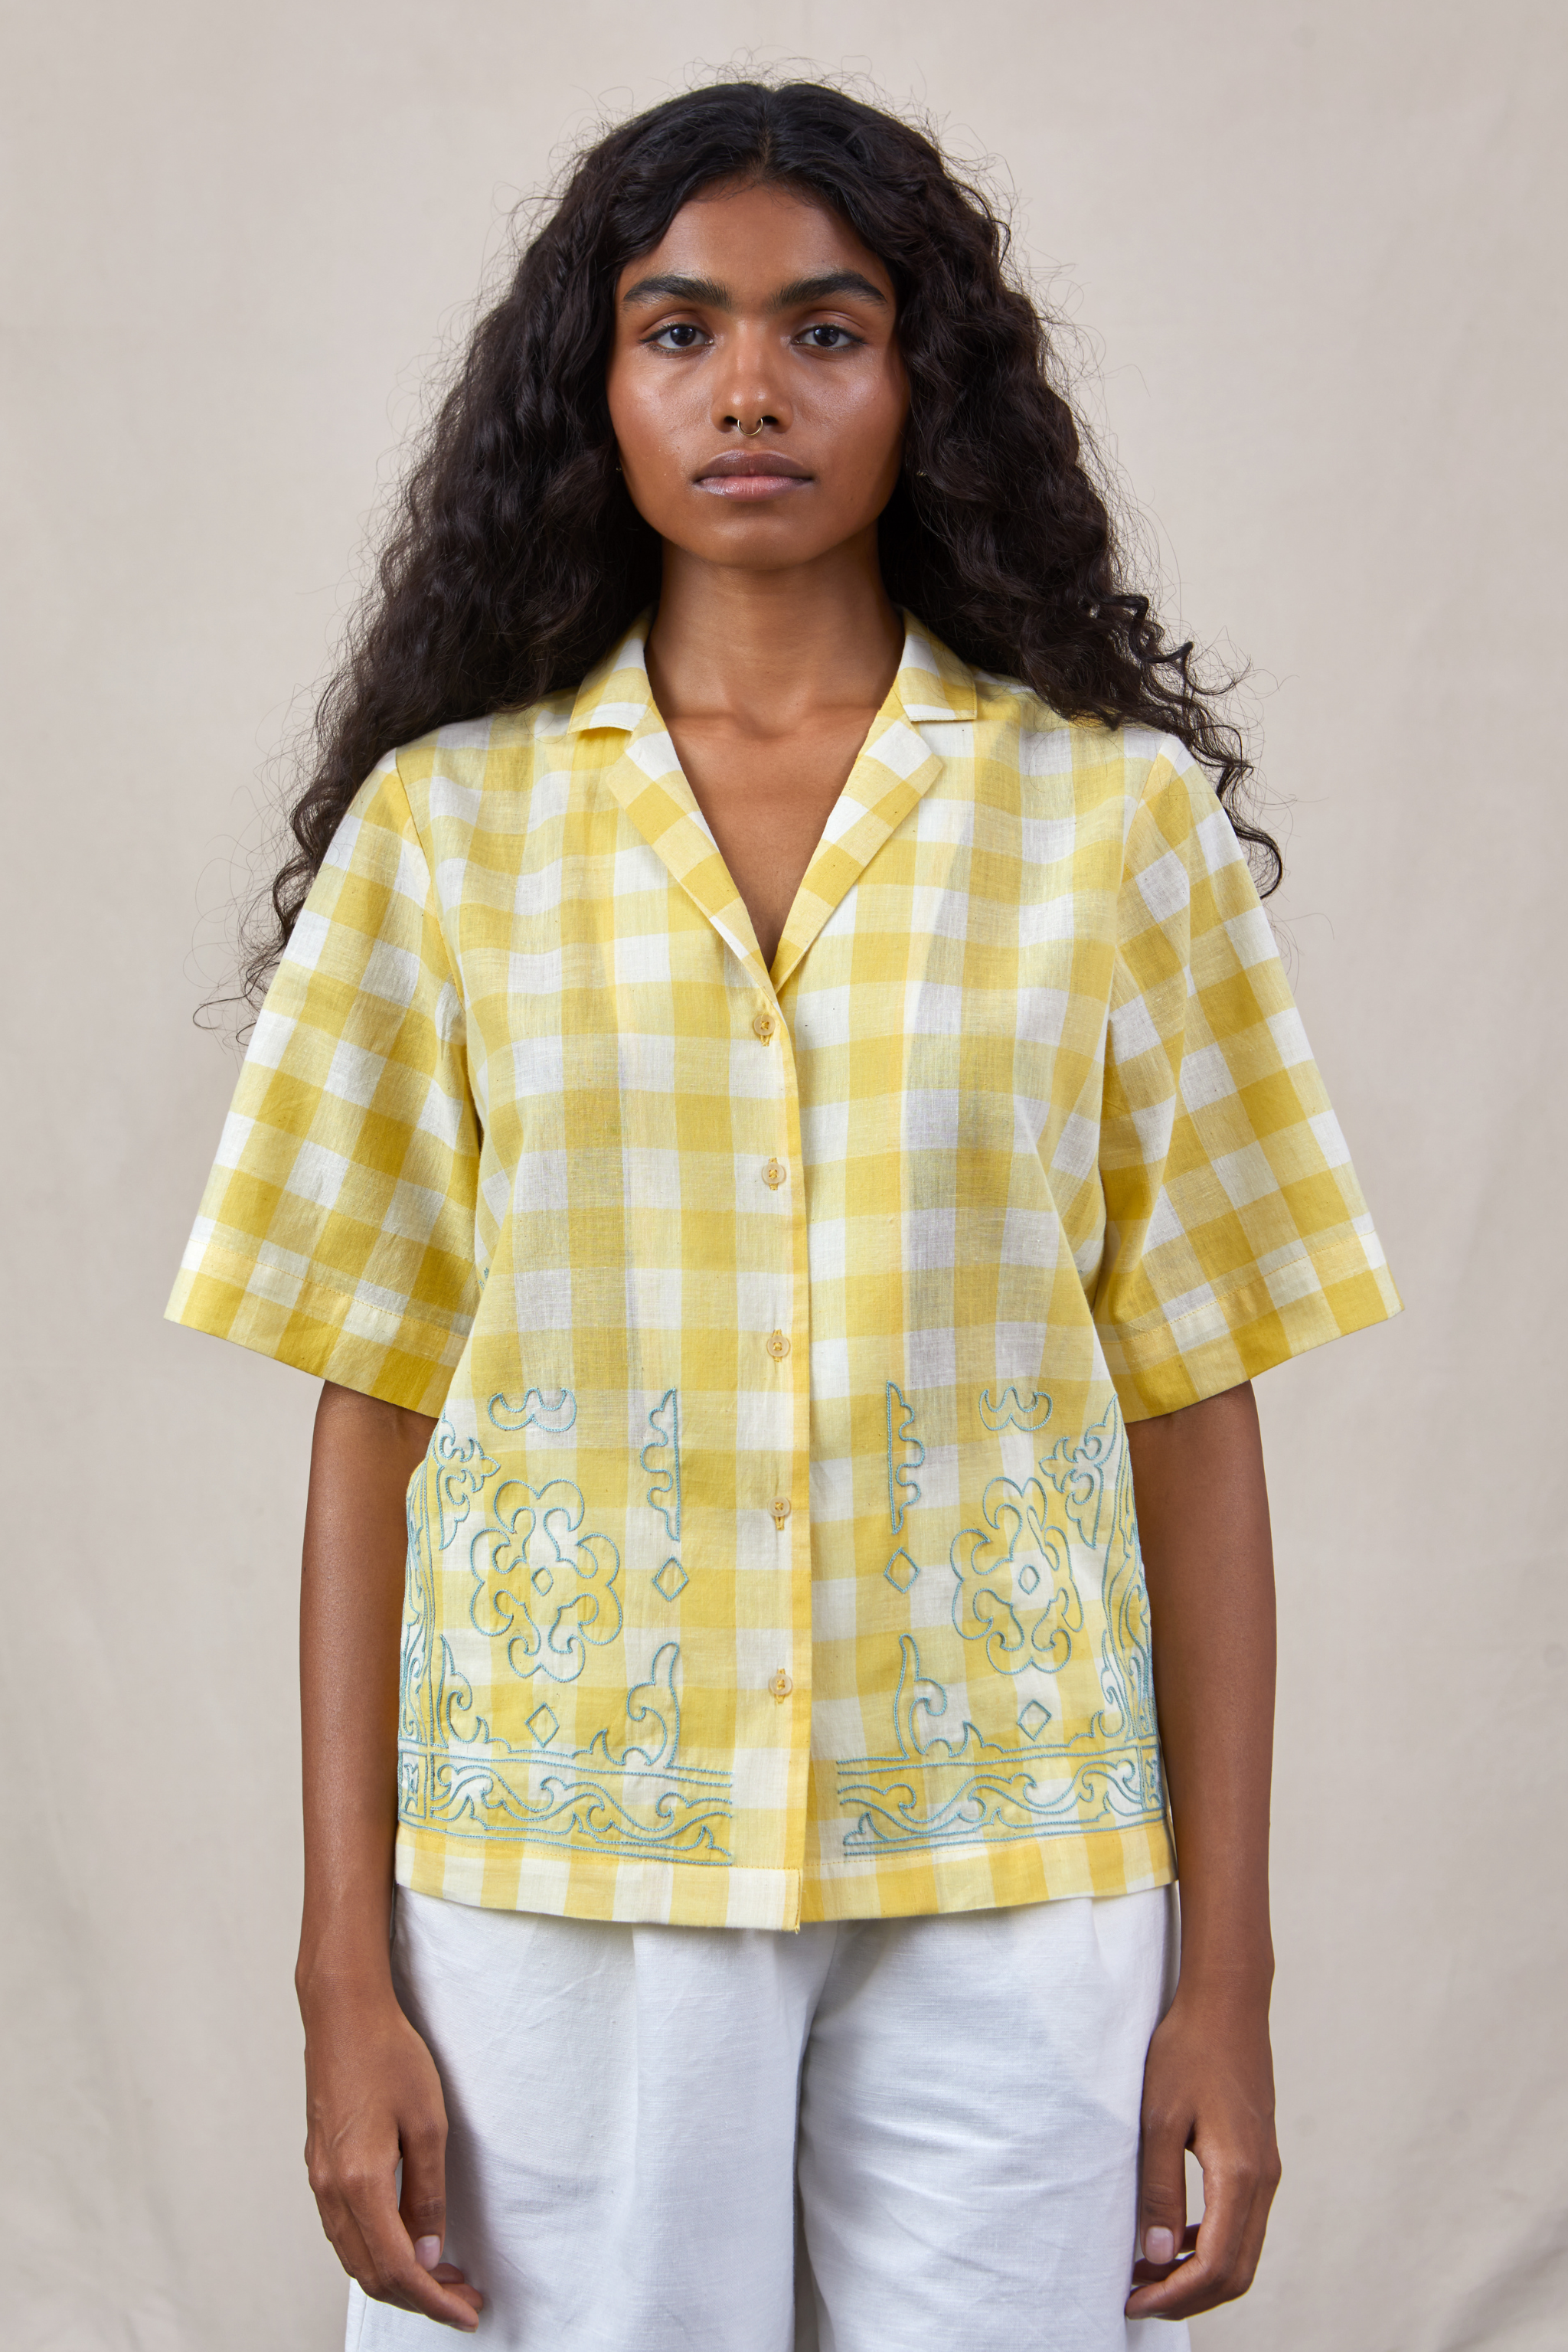 Mayam - Shirt Yellow, a product by The Summer House